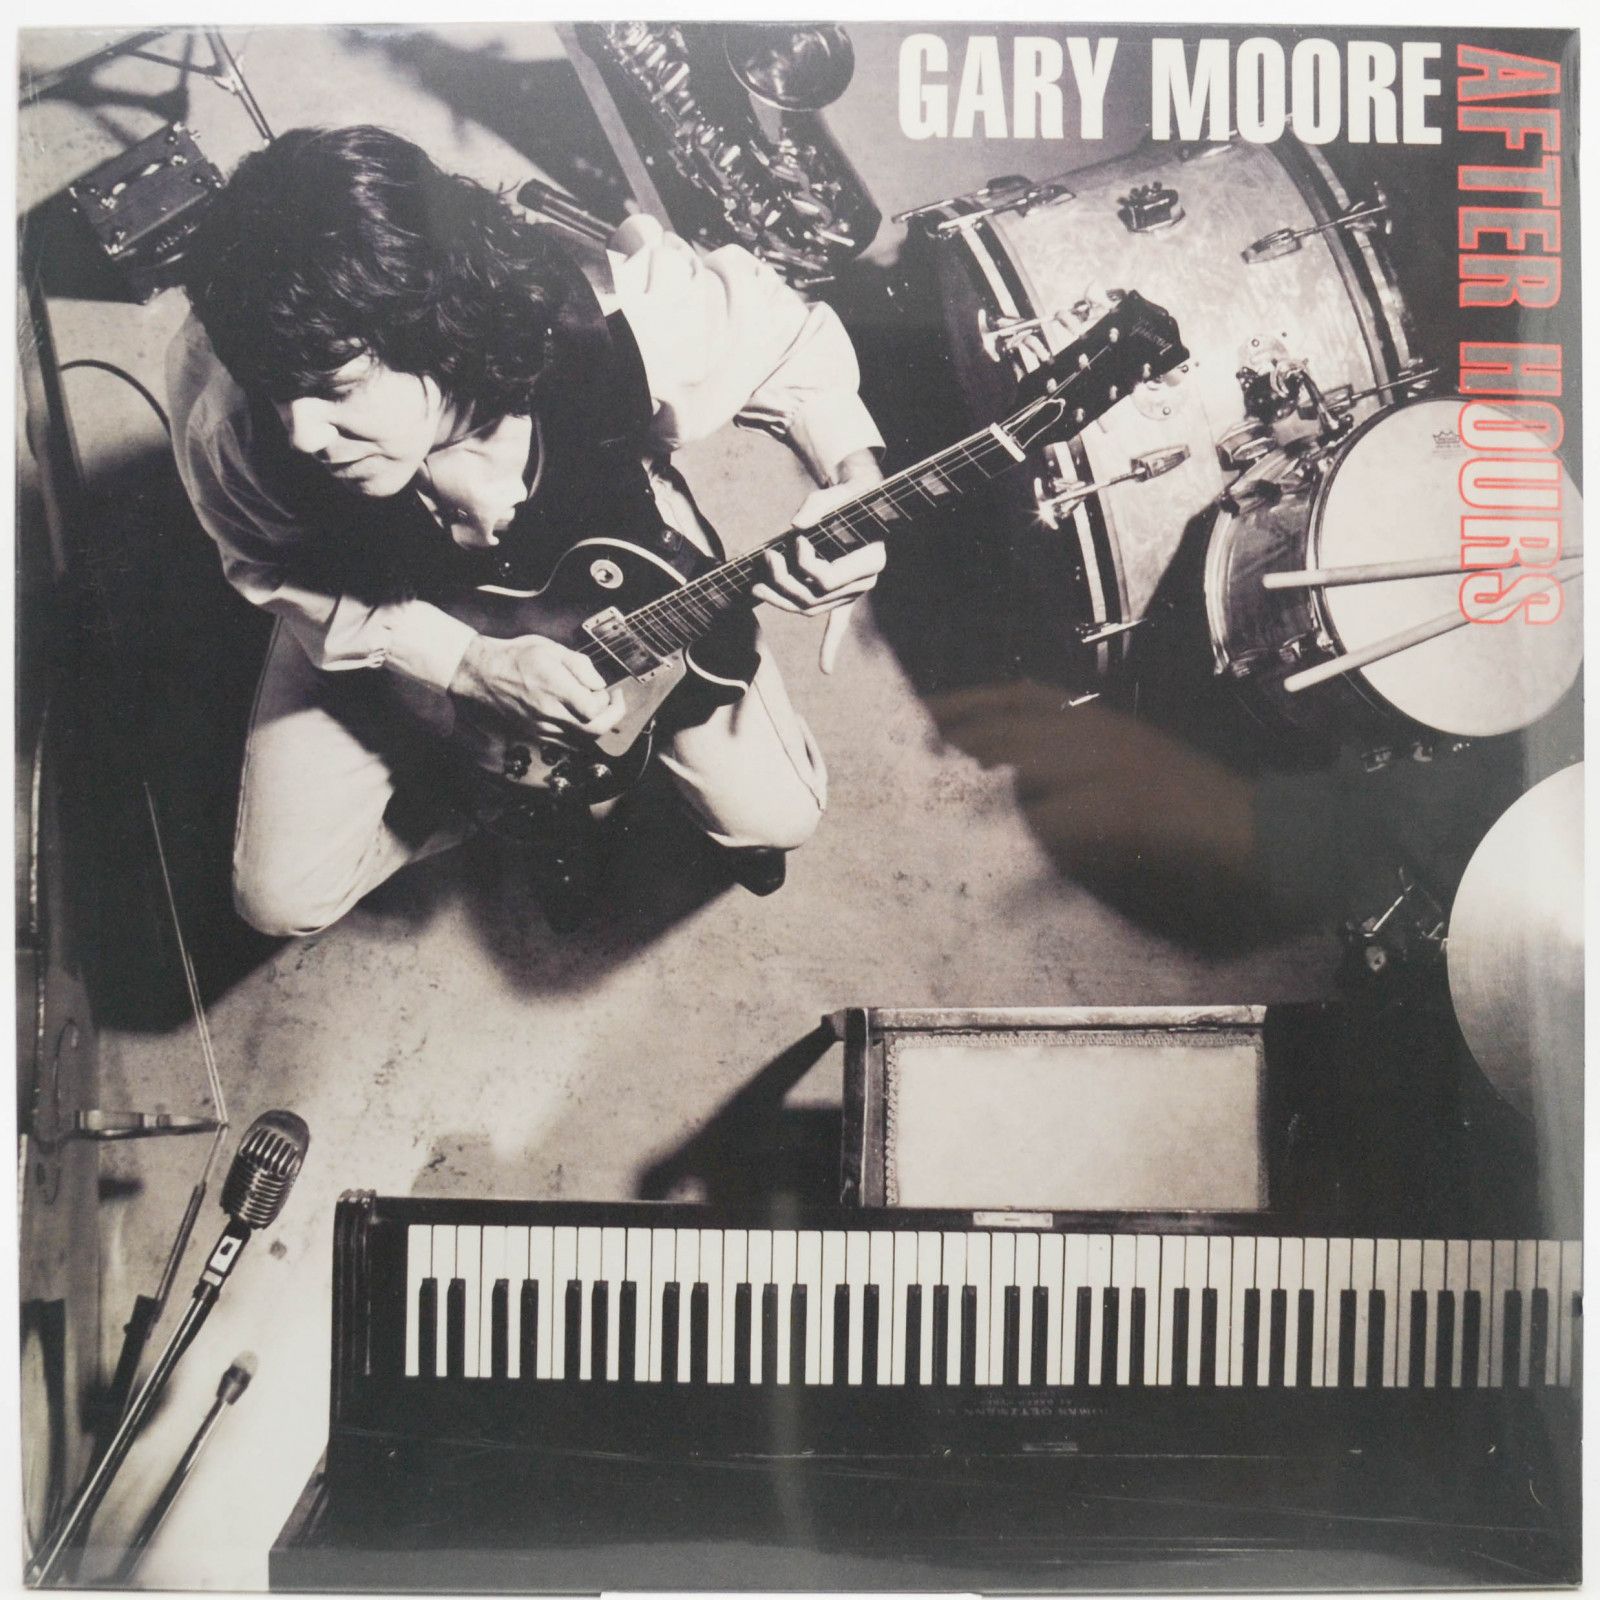 Gary Moore — After Hours, 1992